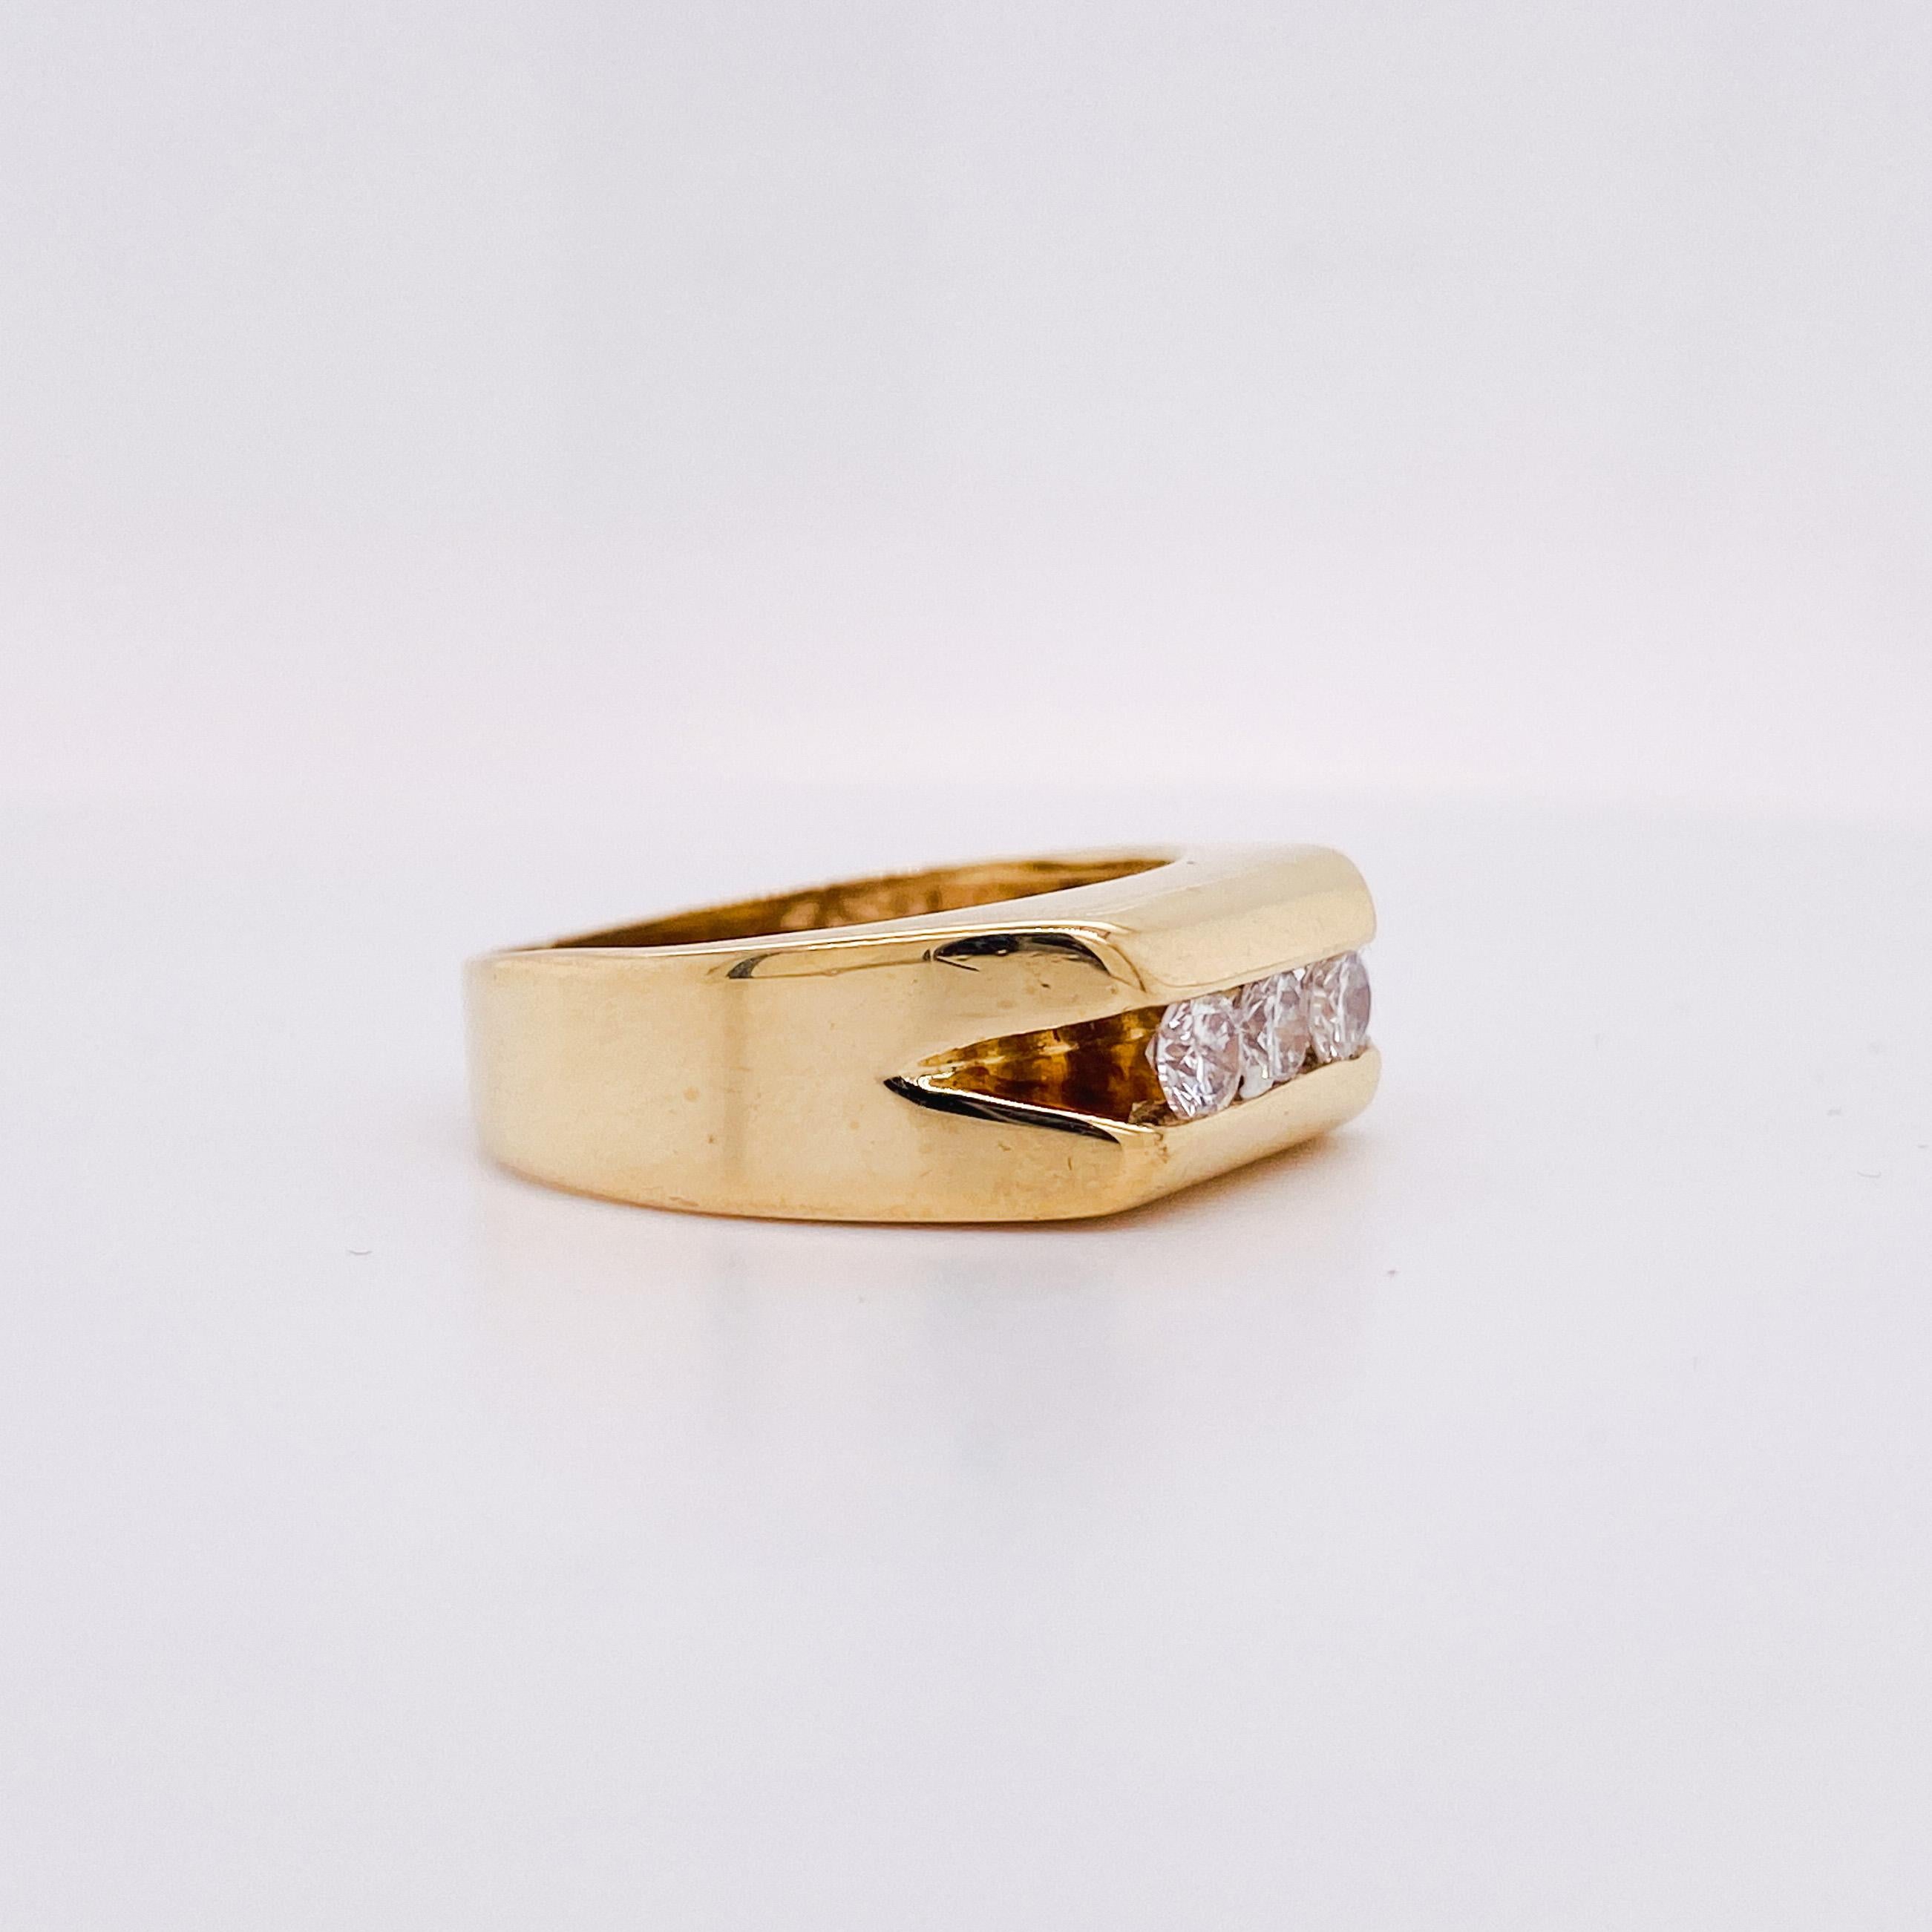 Three diamonds are presented in a secure channel on this beautifully heavy weight 14 karat yellow gold ring! This handsome ring is perfect for a wedding ring or a right hand ring. The channel holding the diamonds is deep and brightly polished